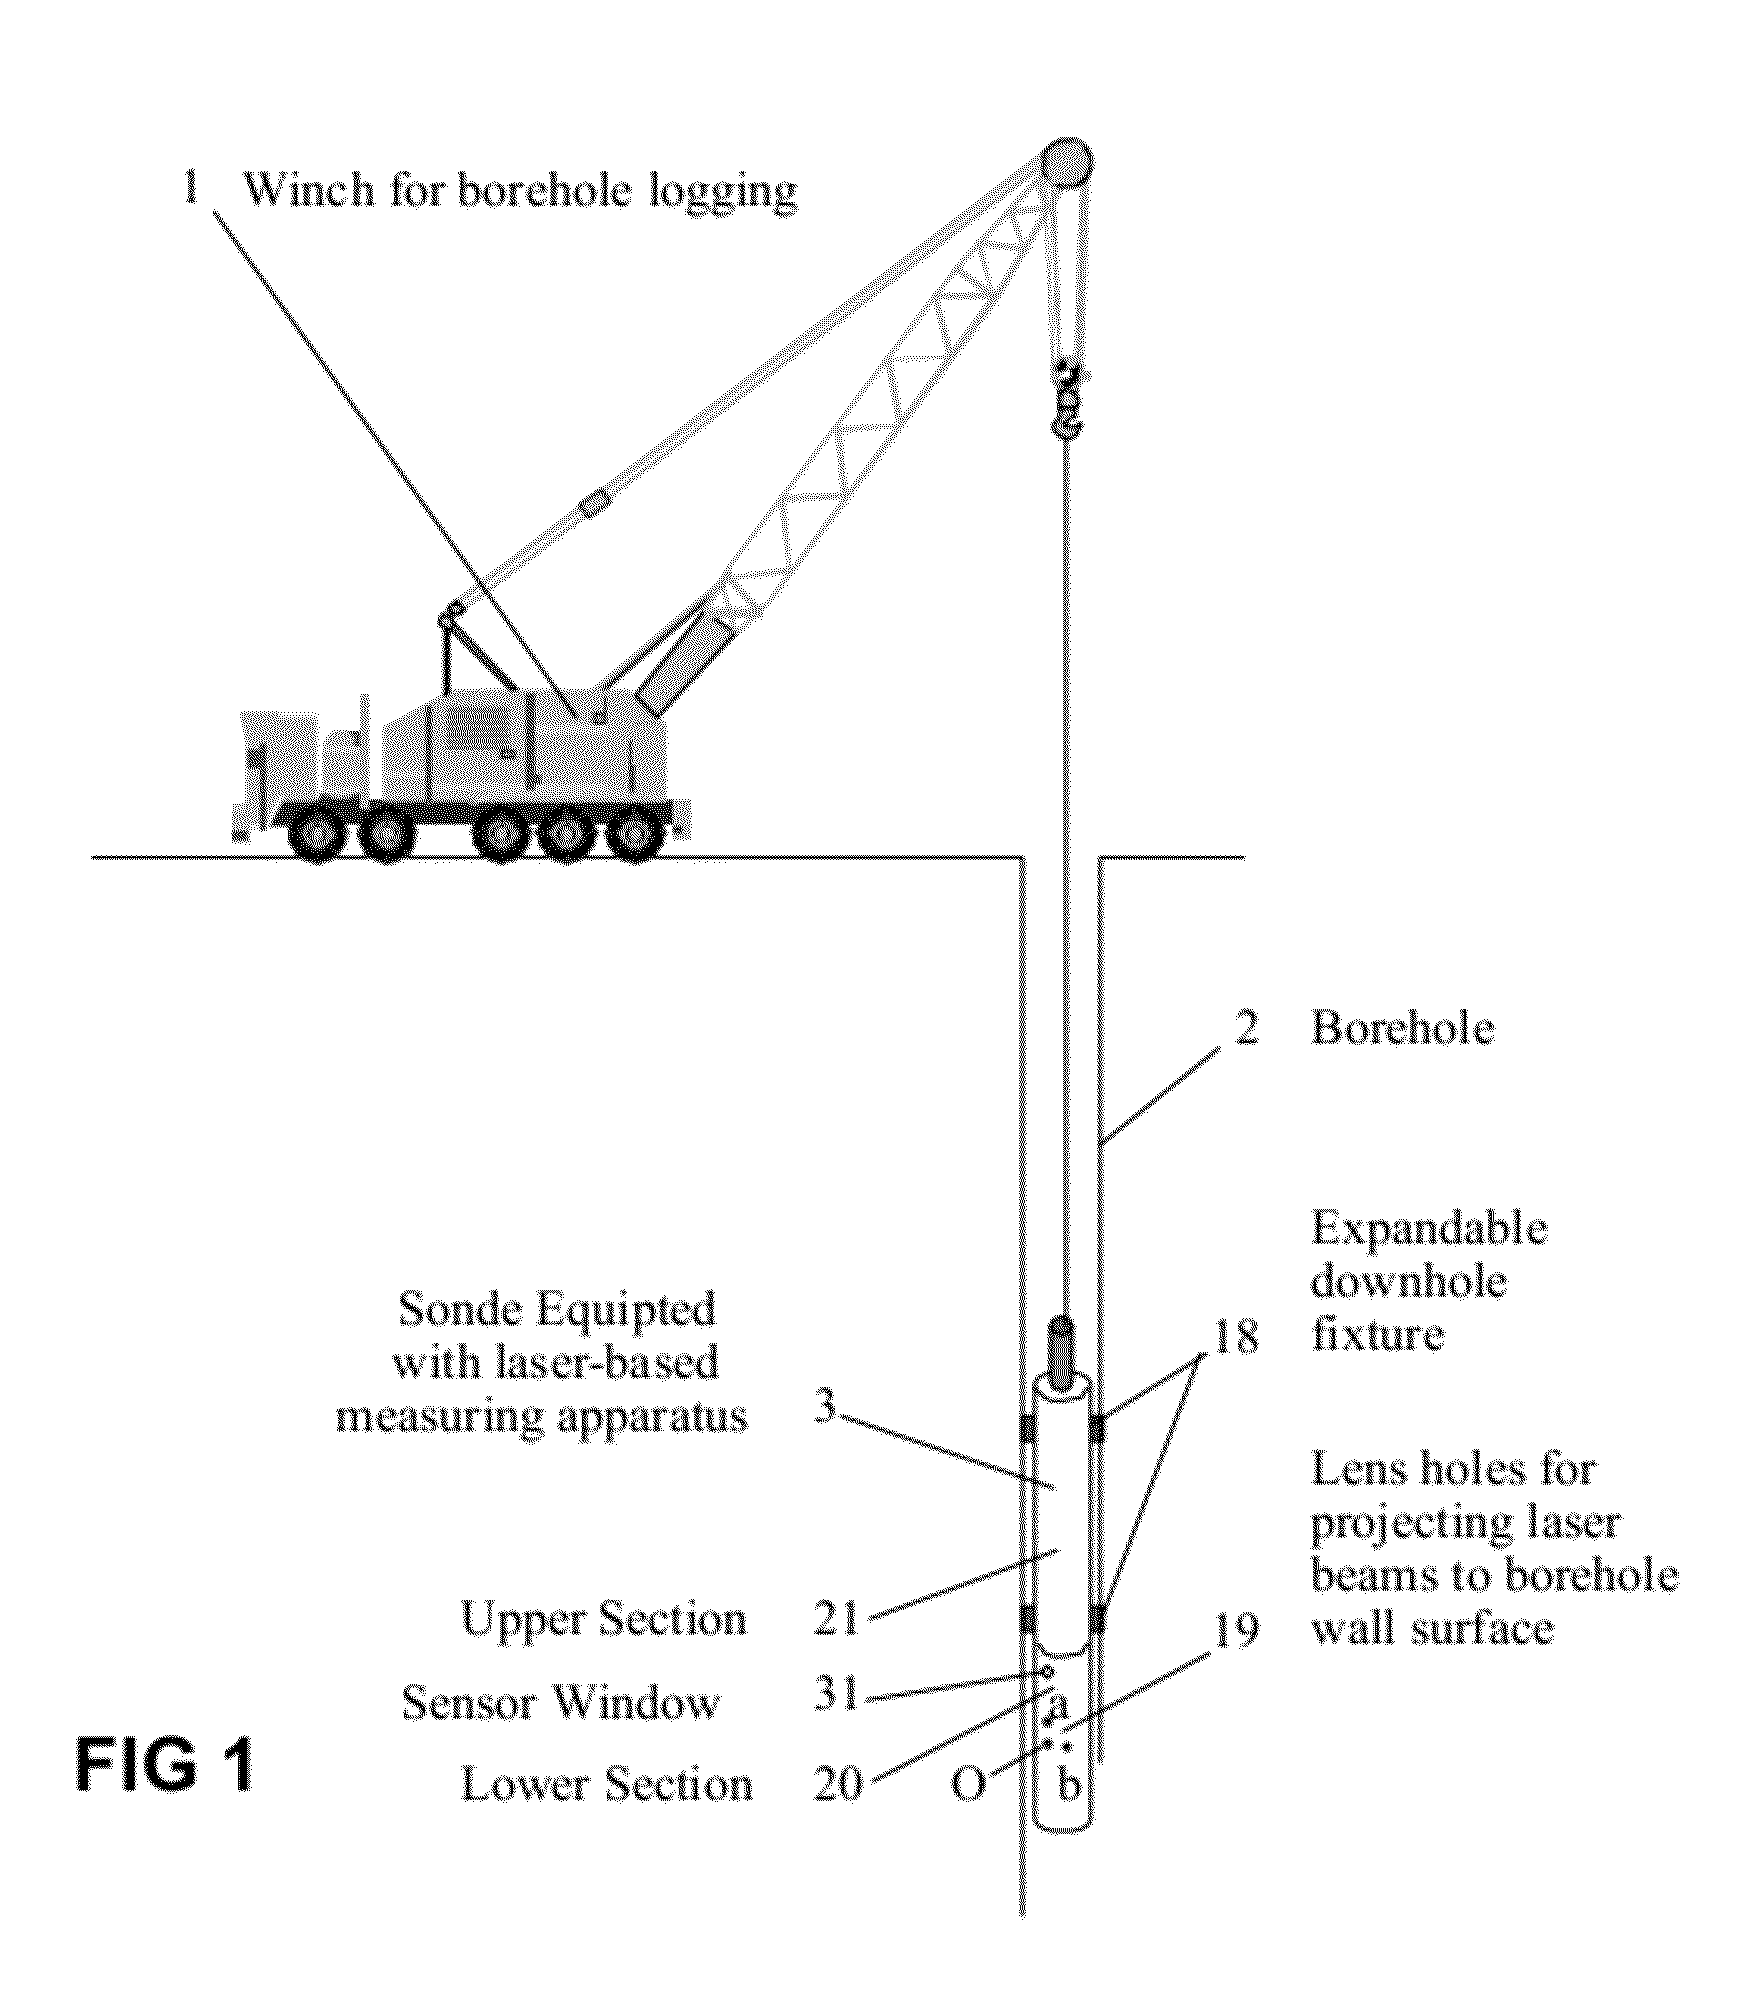 Method and Apparatus for Laser-Based Non-Contact Three-Dimensional Borehole Stress Measurement and Pristine Stress Estimation